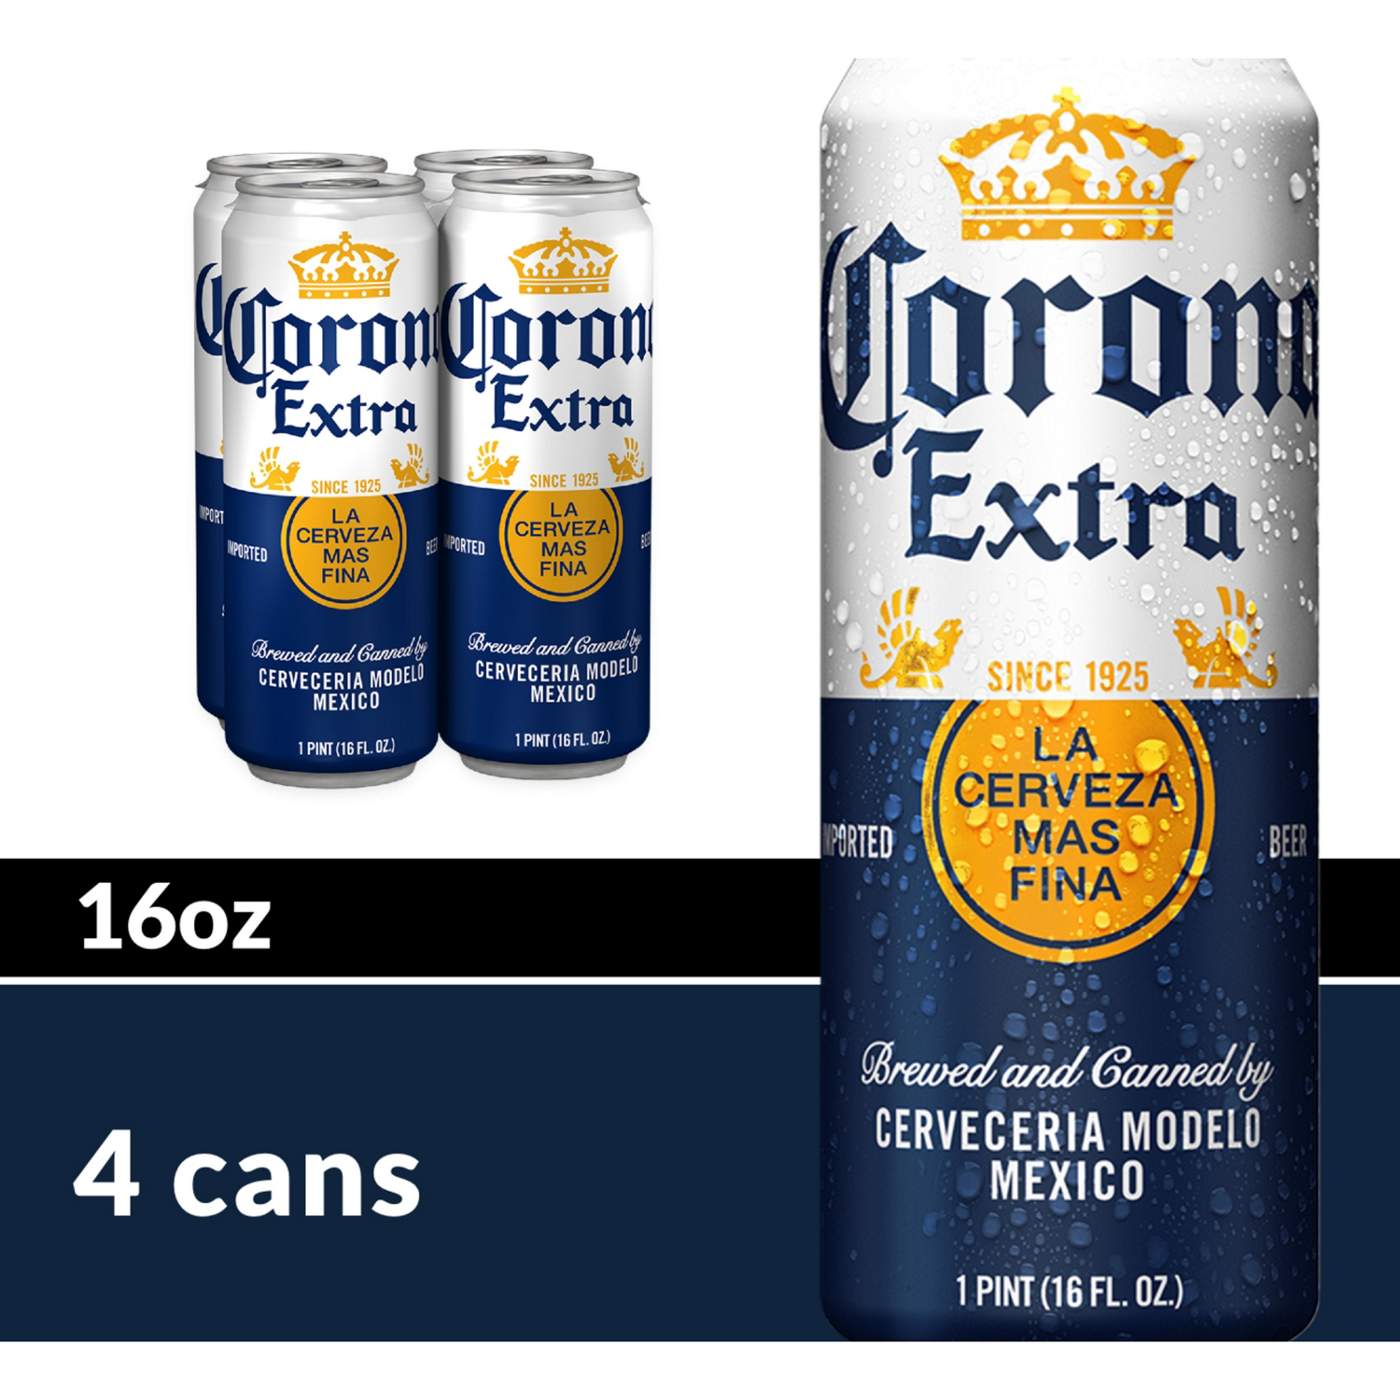 Corona Extra Mexican Lager Import Beer 16 oz Cans, 4 pk; image 2 of 11